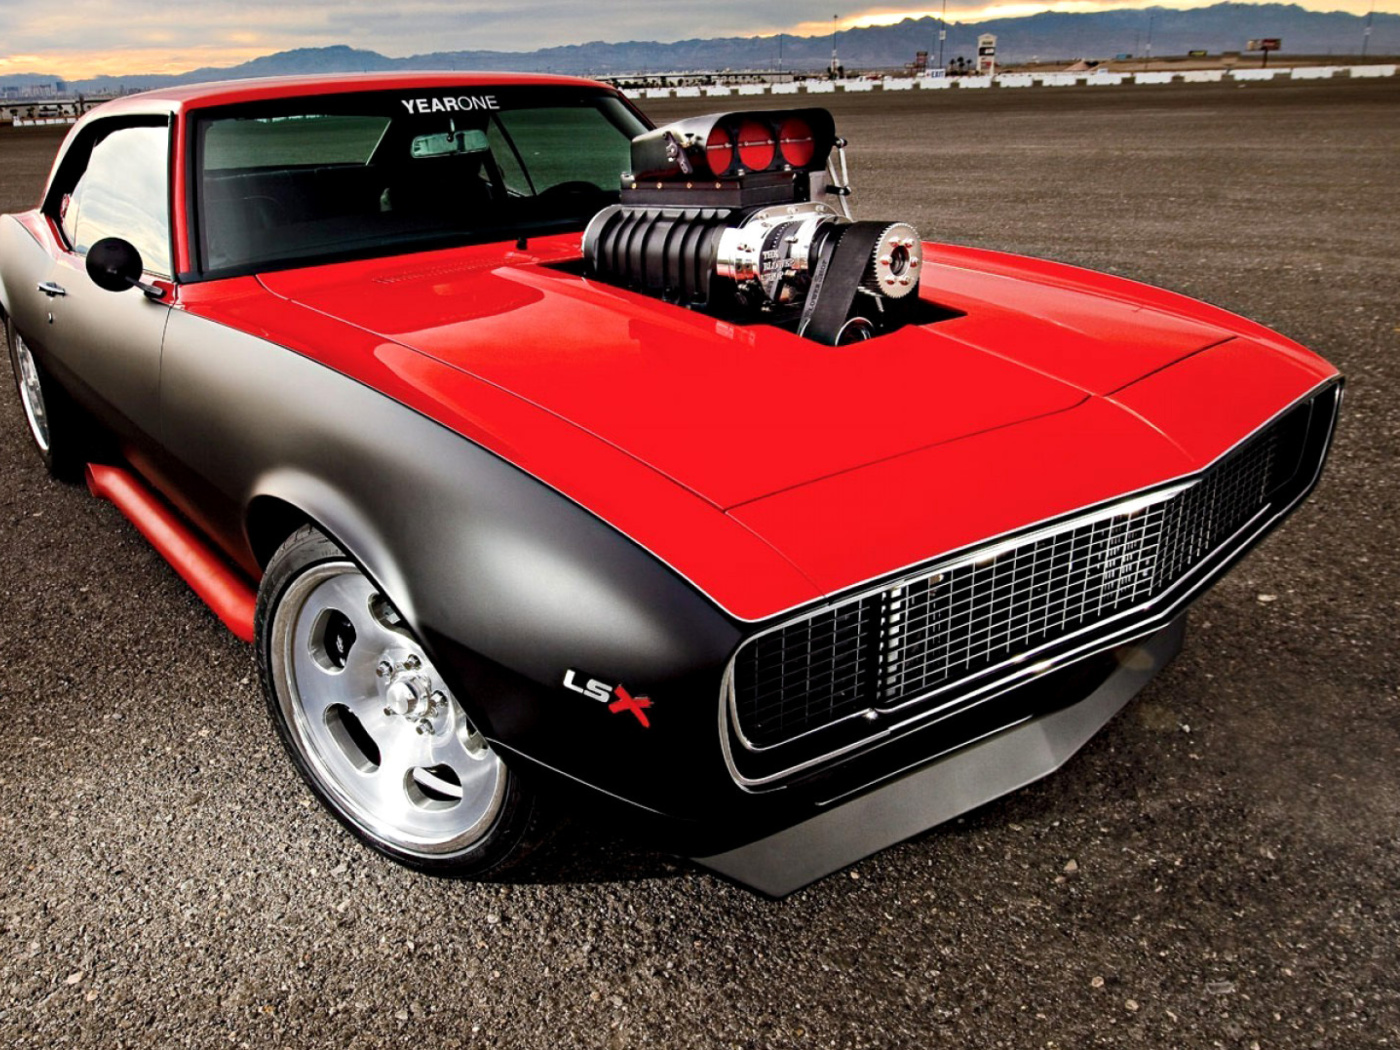 Chevrolet Hot Rod Muscle Car with GM Engine screenshot #1 1400x1050